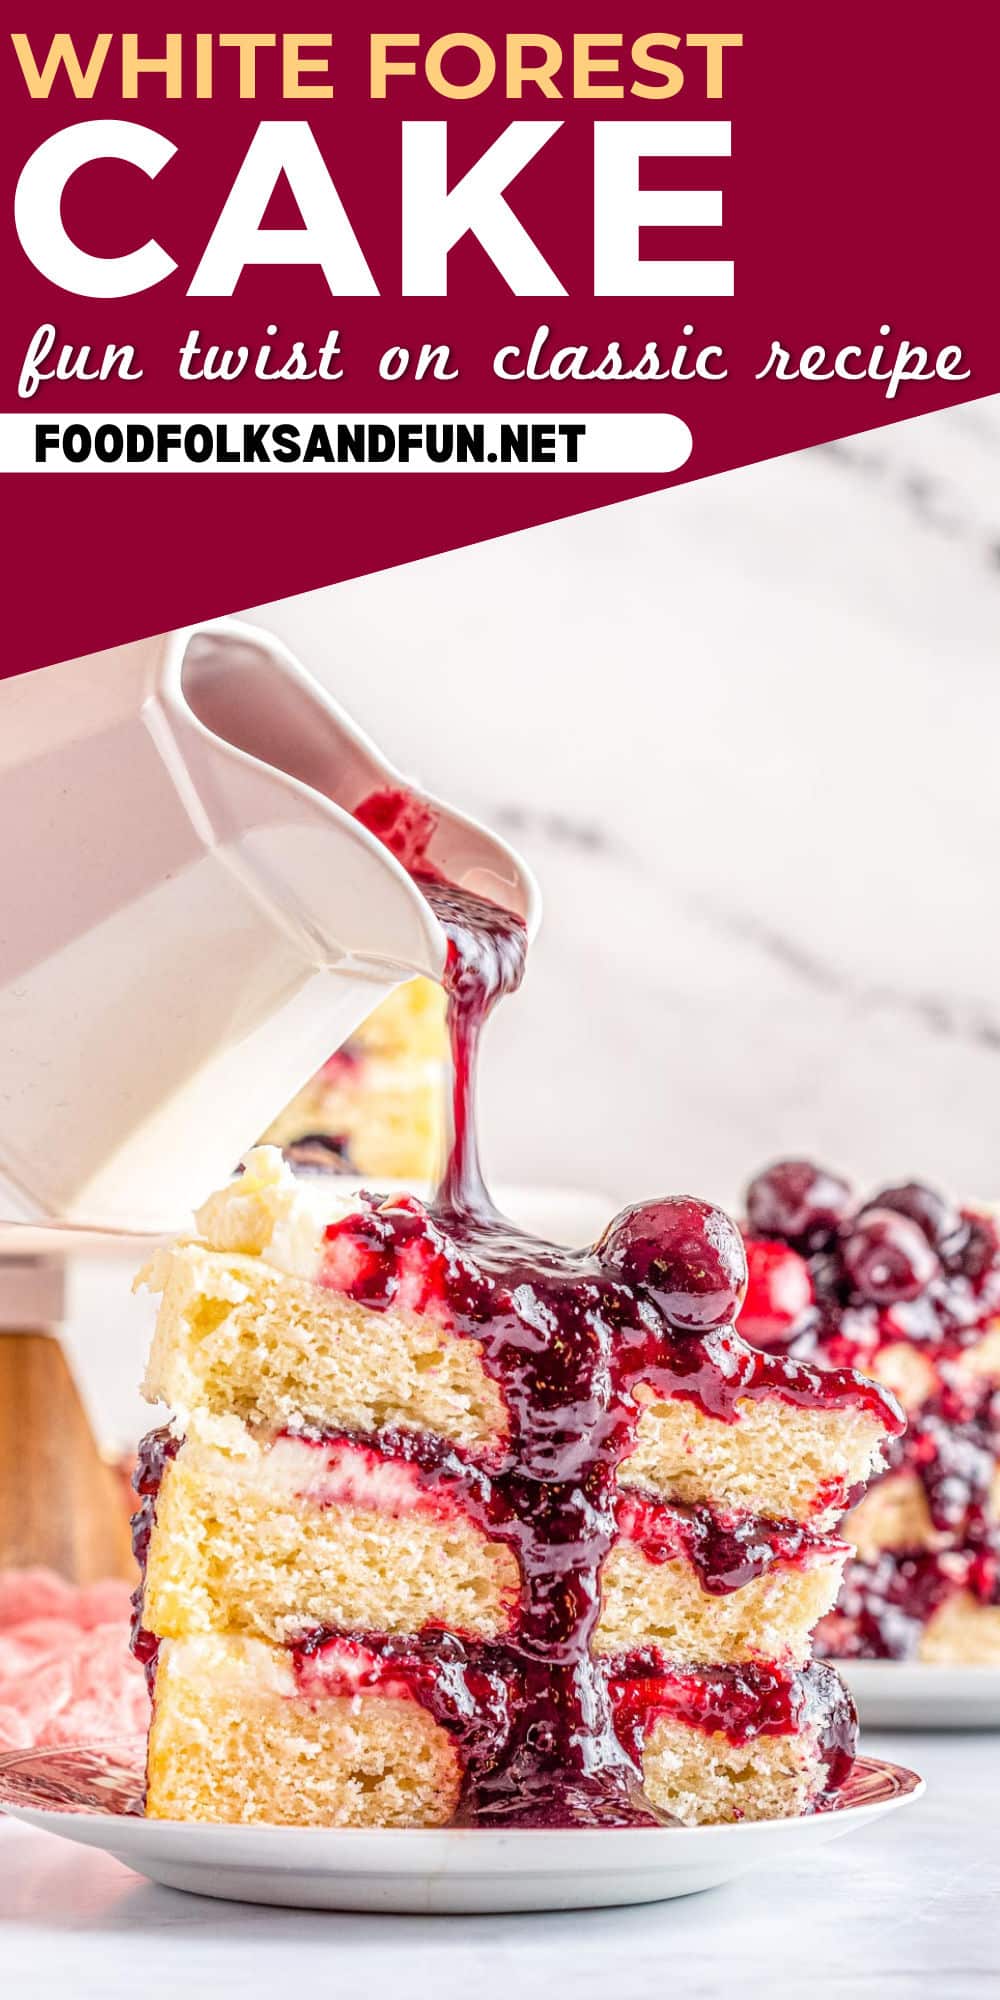 White Forest Cake has three moist, tender white cake layers, white chocolate whipped cream, and a juicy homemade cherry sauce. via @foodfolksandfun